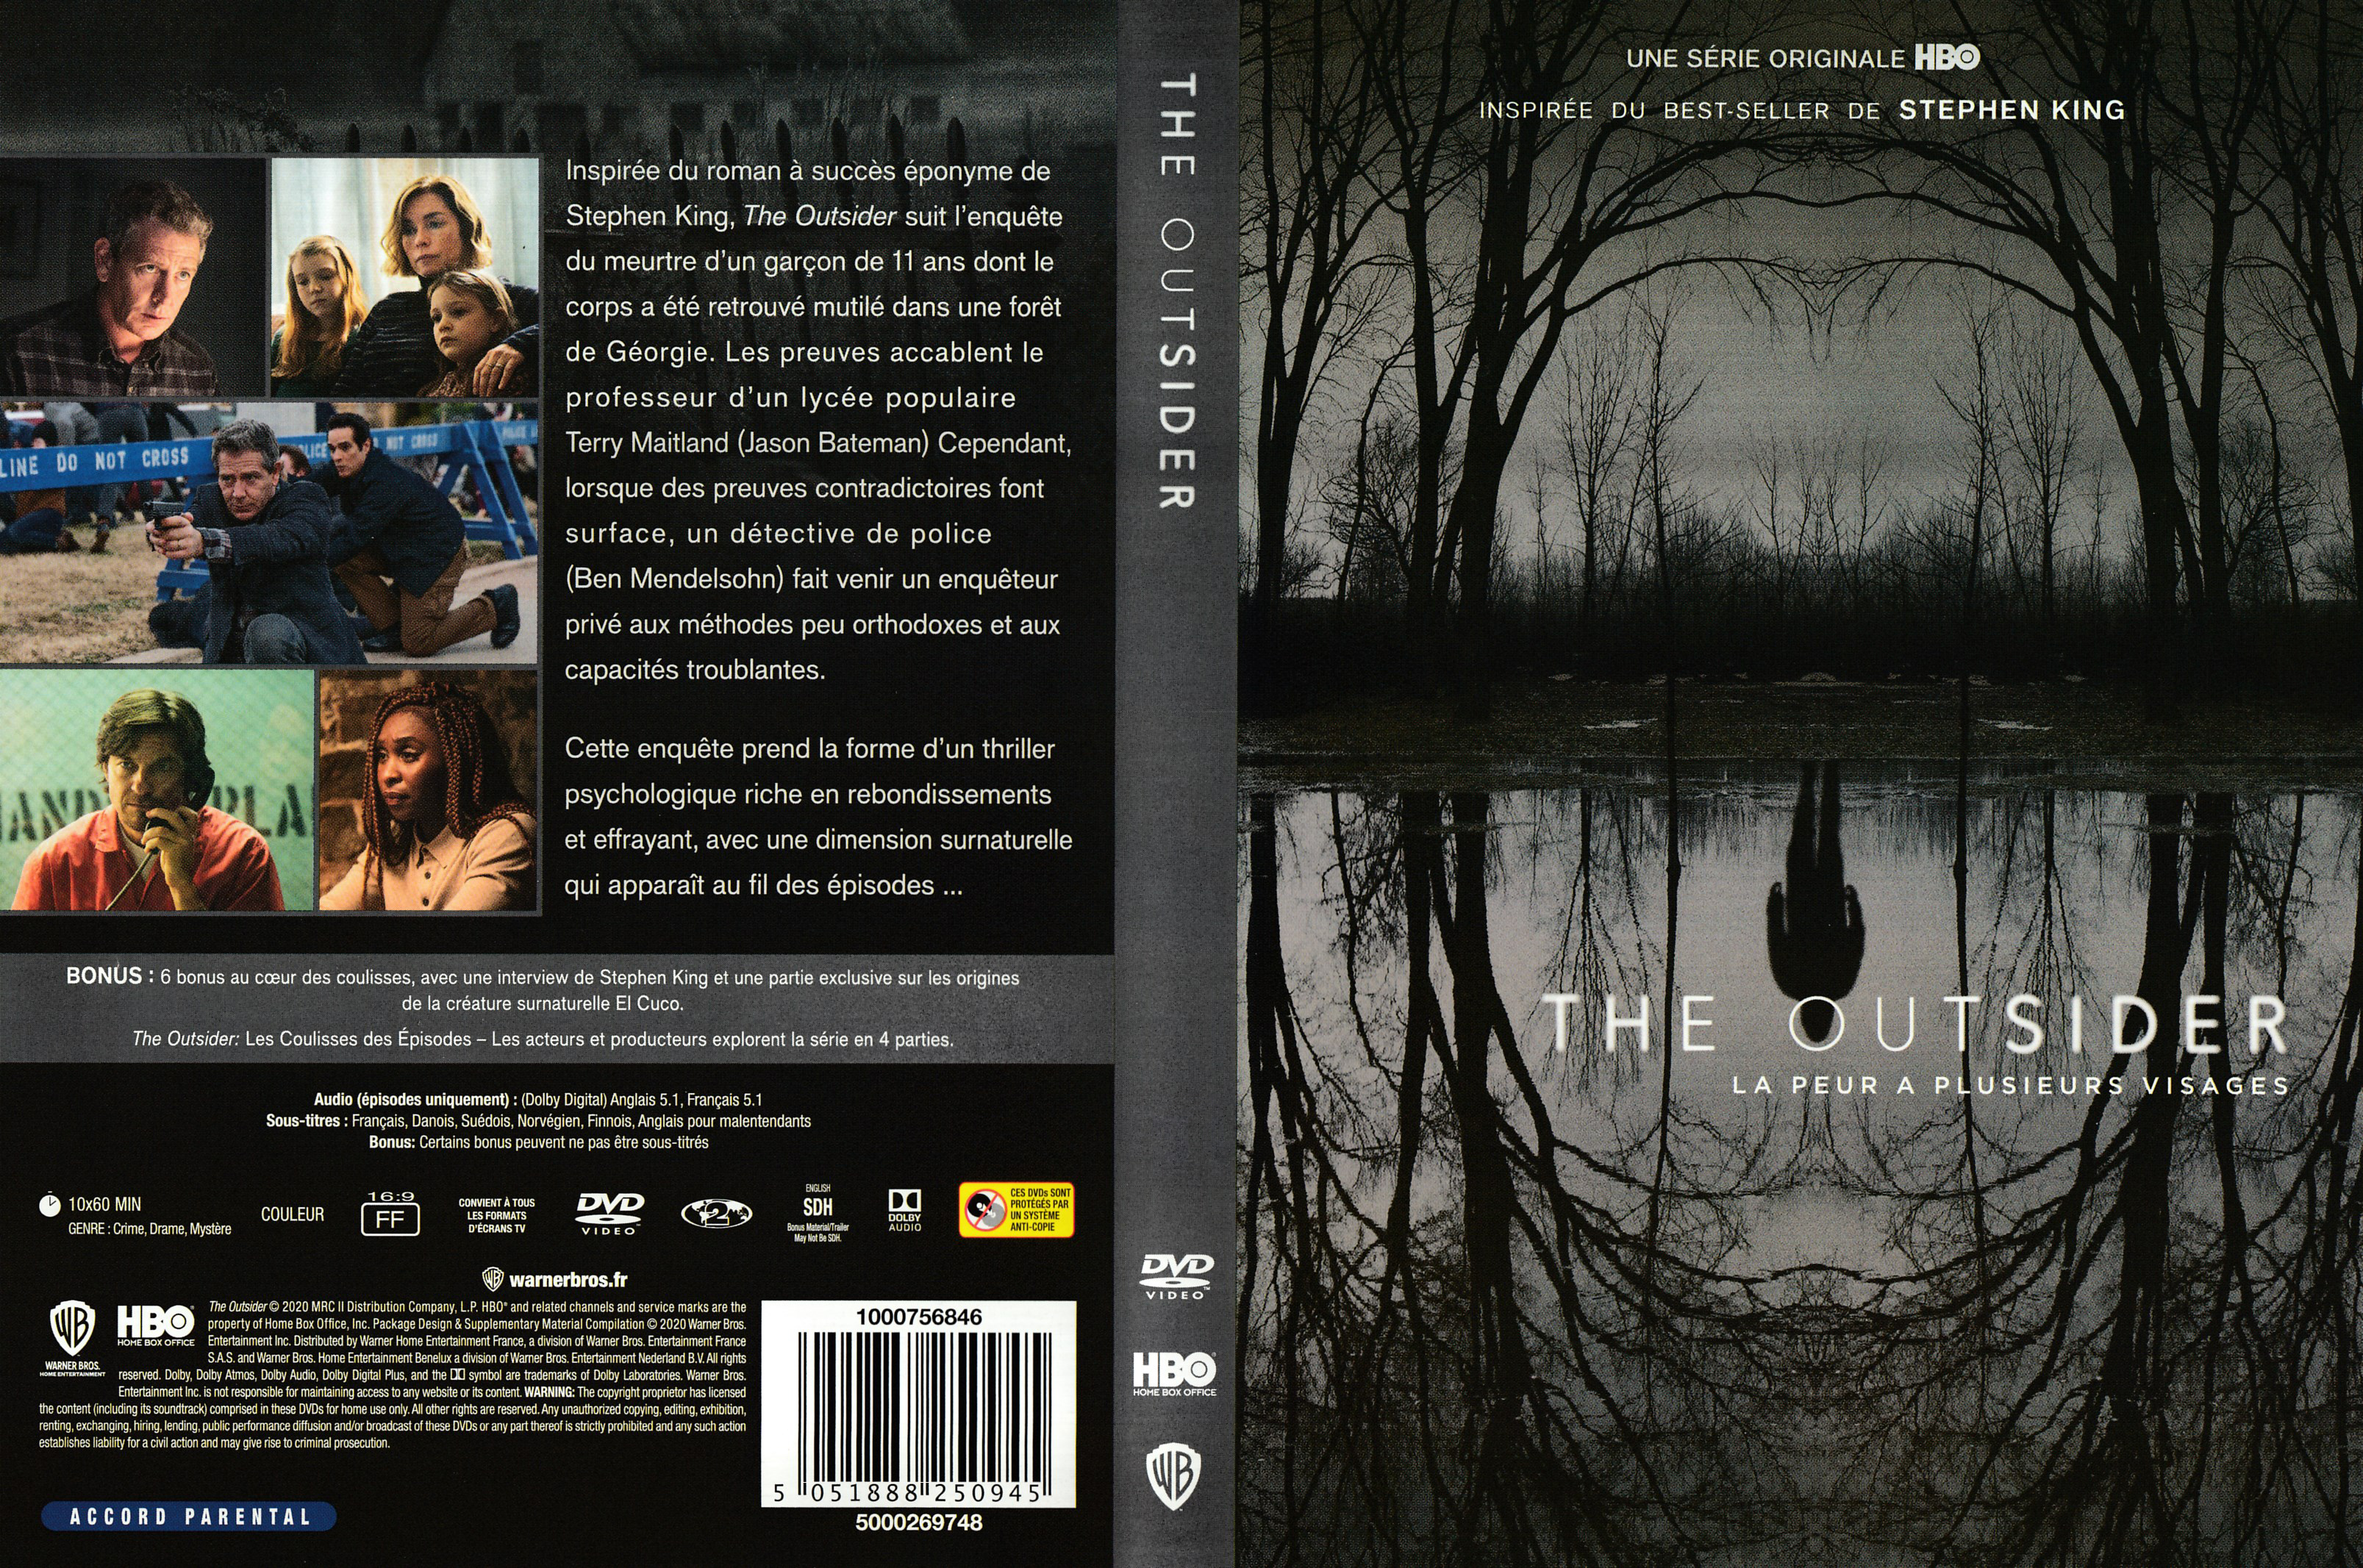 Jaquette DVD The outsider (Srie TV)